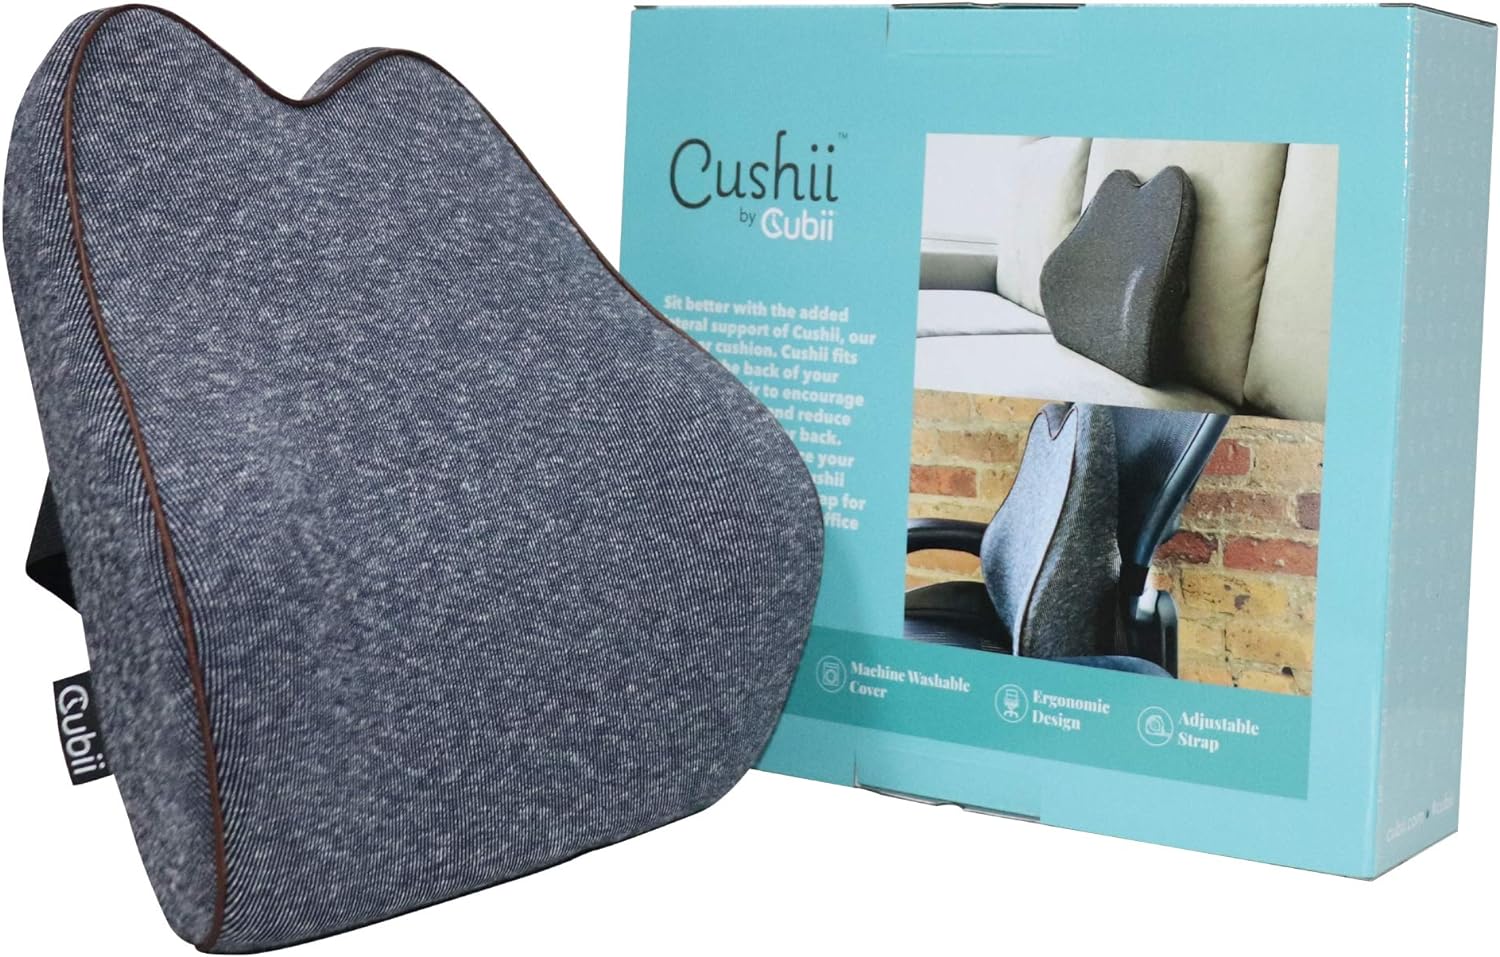 Amazon.com: Cubii Cushii Lateral Lumbar Support Cushion - Relieve Back Pain - Improve Posture: Home & Kitchen